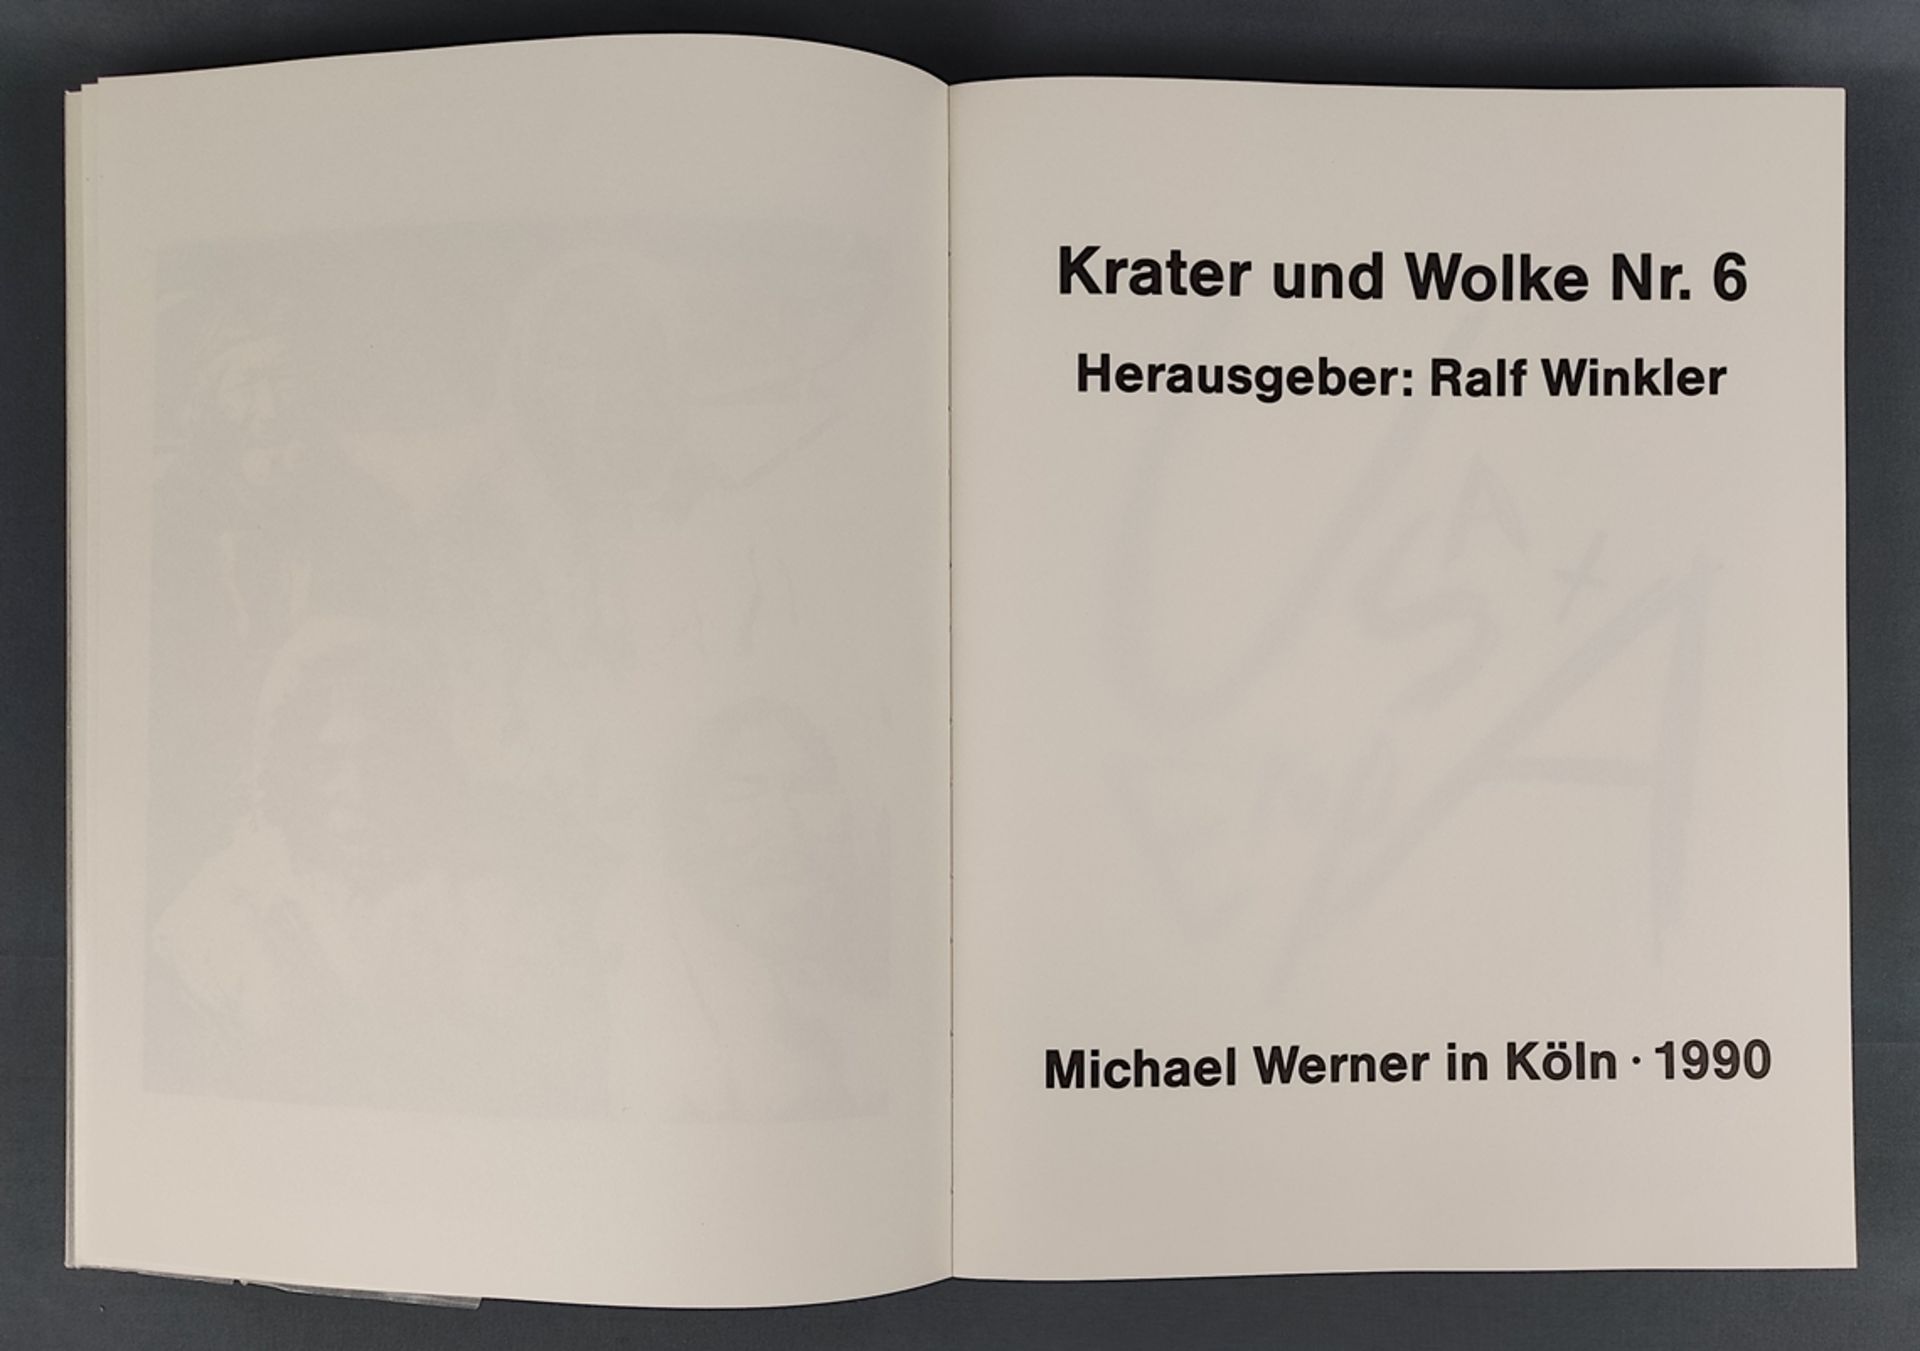 2 volumes "Krater und Wolke", consisting of no. 6 and no. 7, no. 6: Winkler, Ralf (A. R. Penck), ed - Image 7 of 12